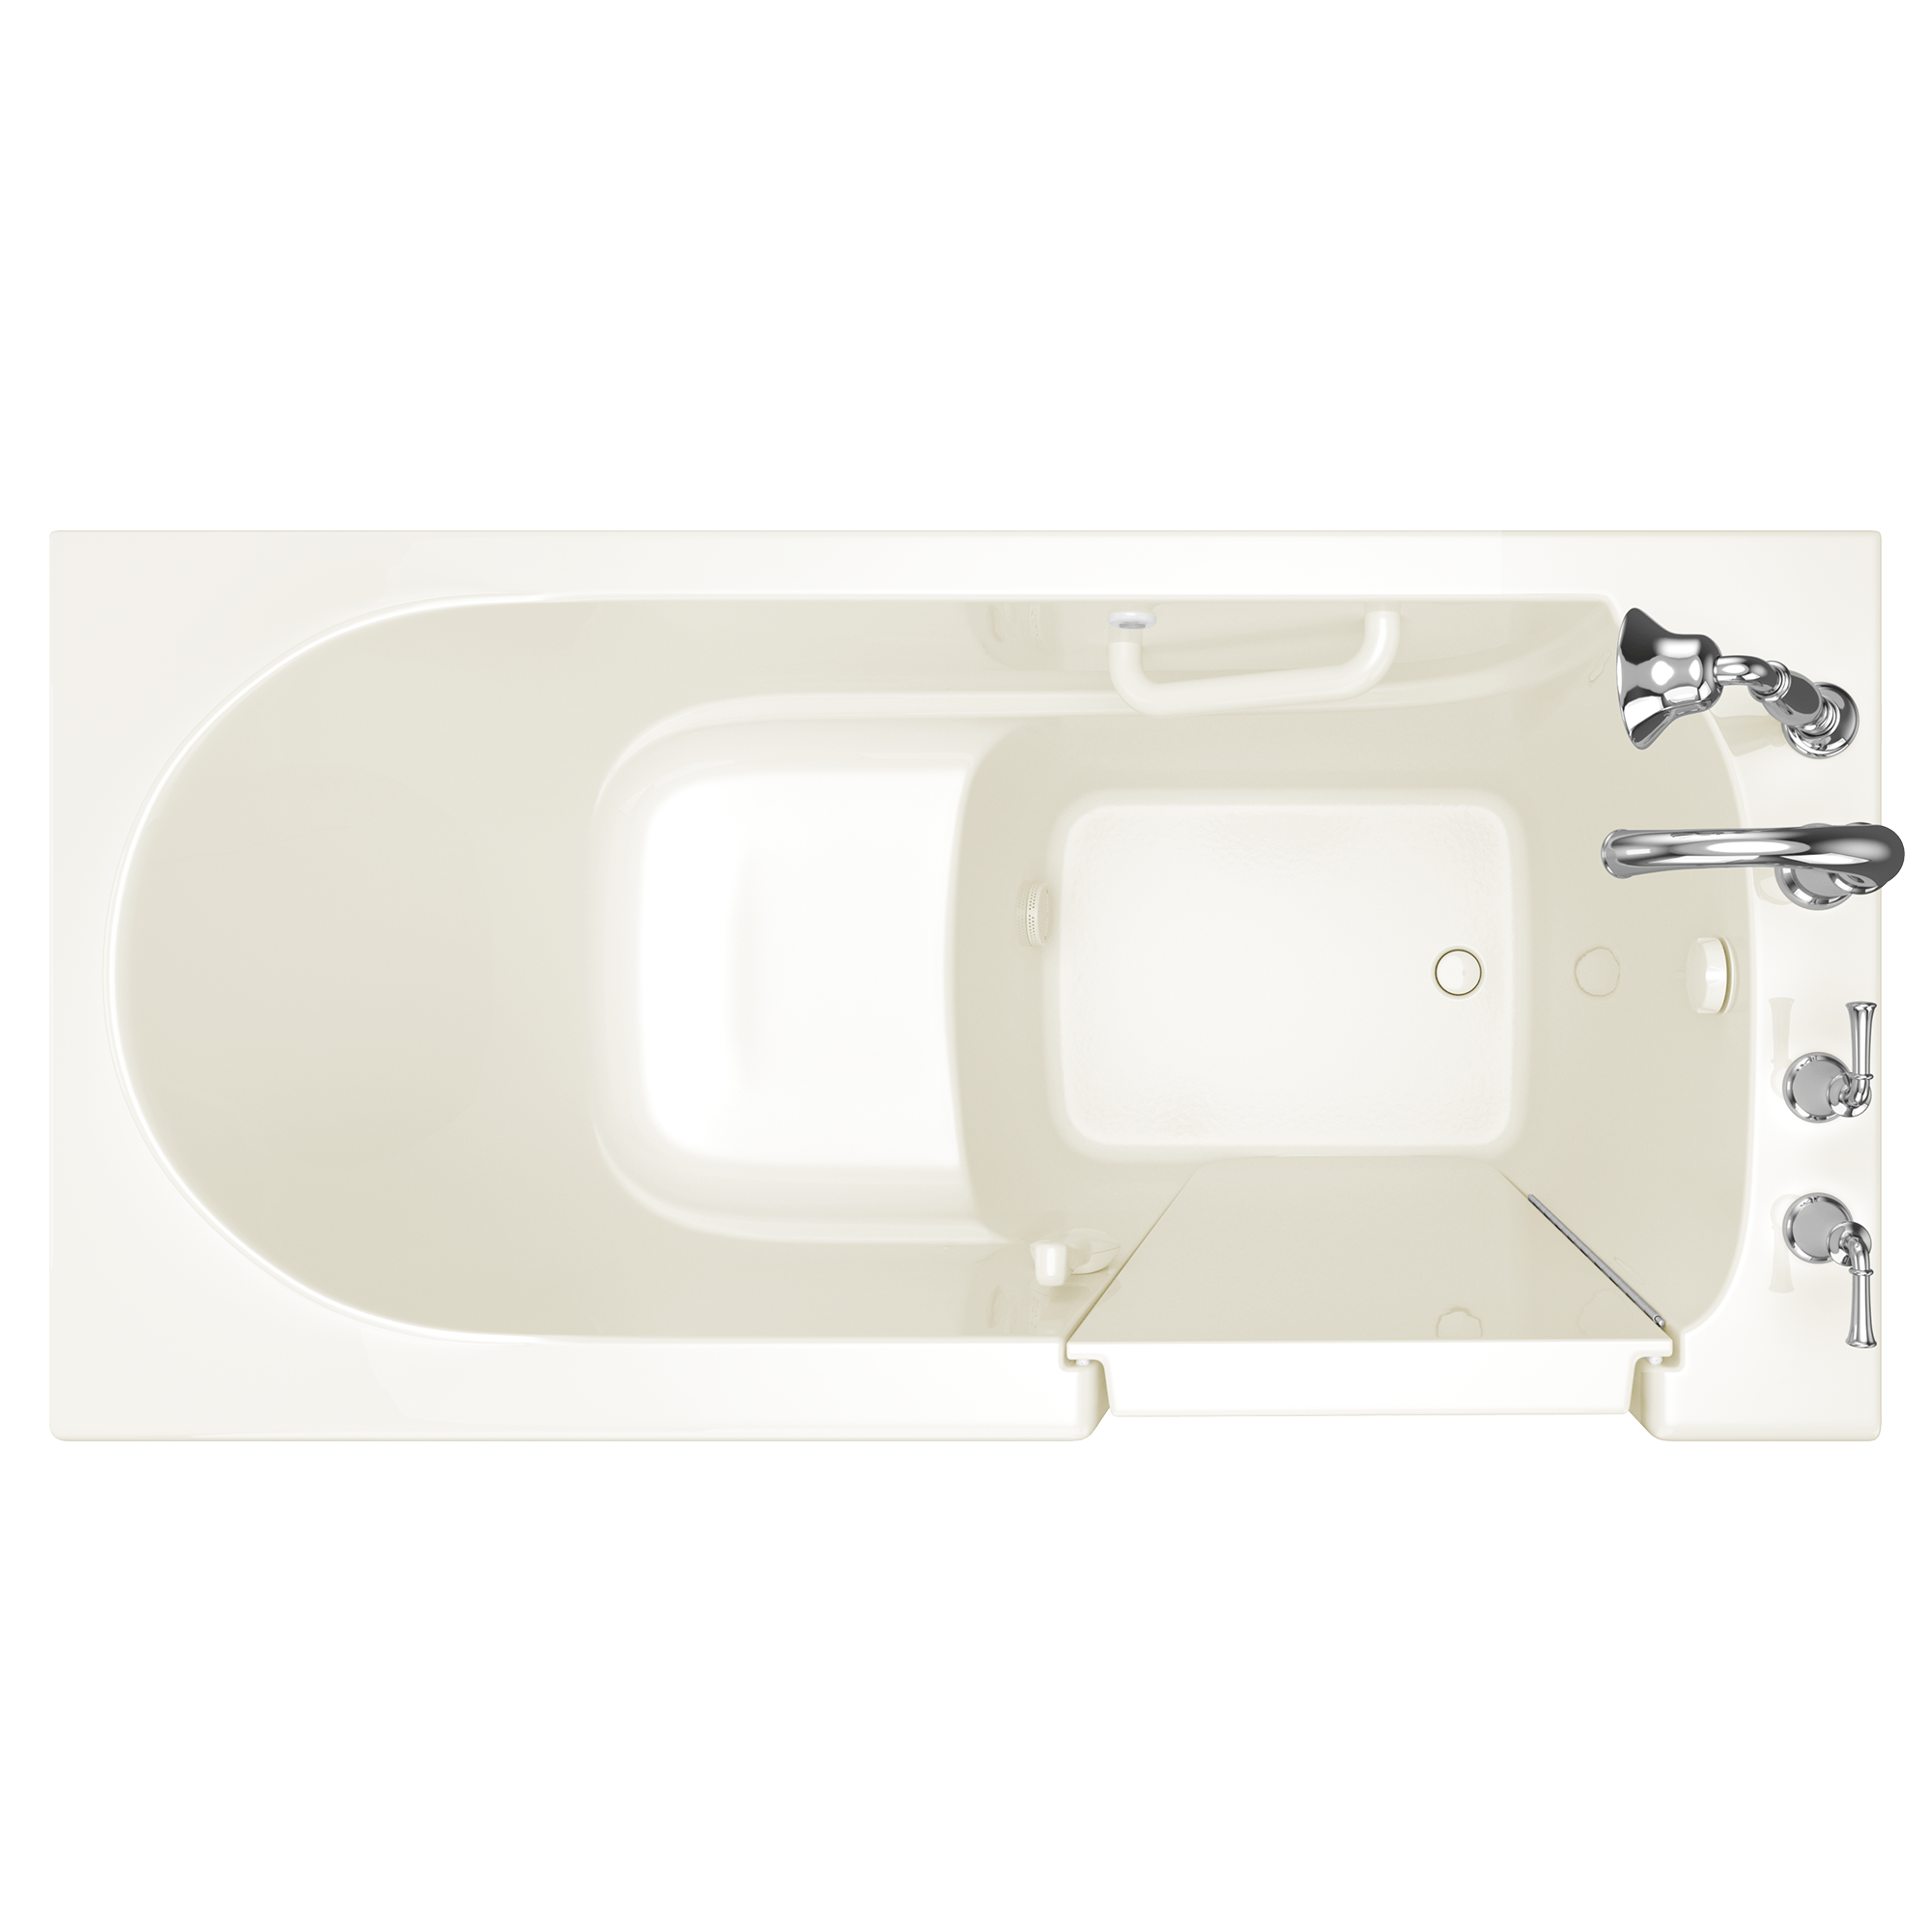 Gelcoat Value Series 30 x 60 -Inch Walk-in Tub With Soaker System - Right-Hand Drain With Faucet